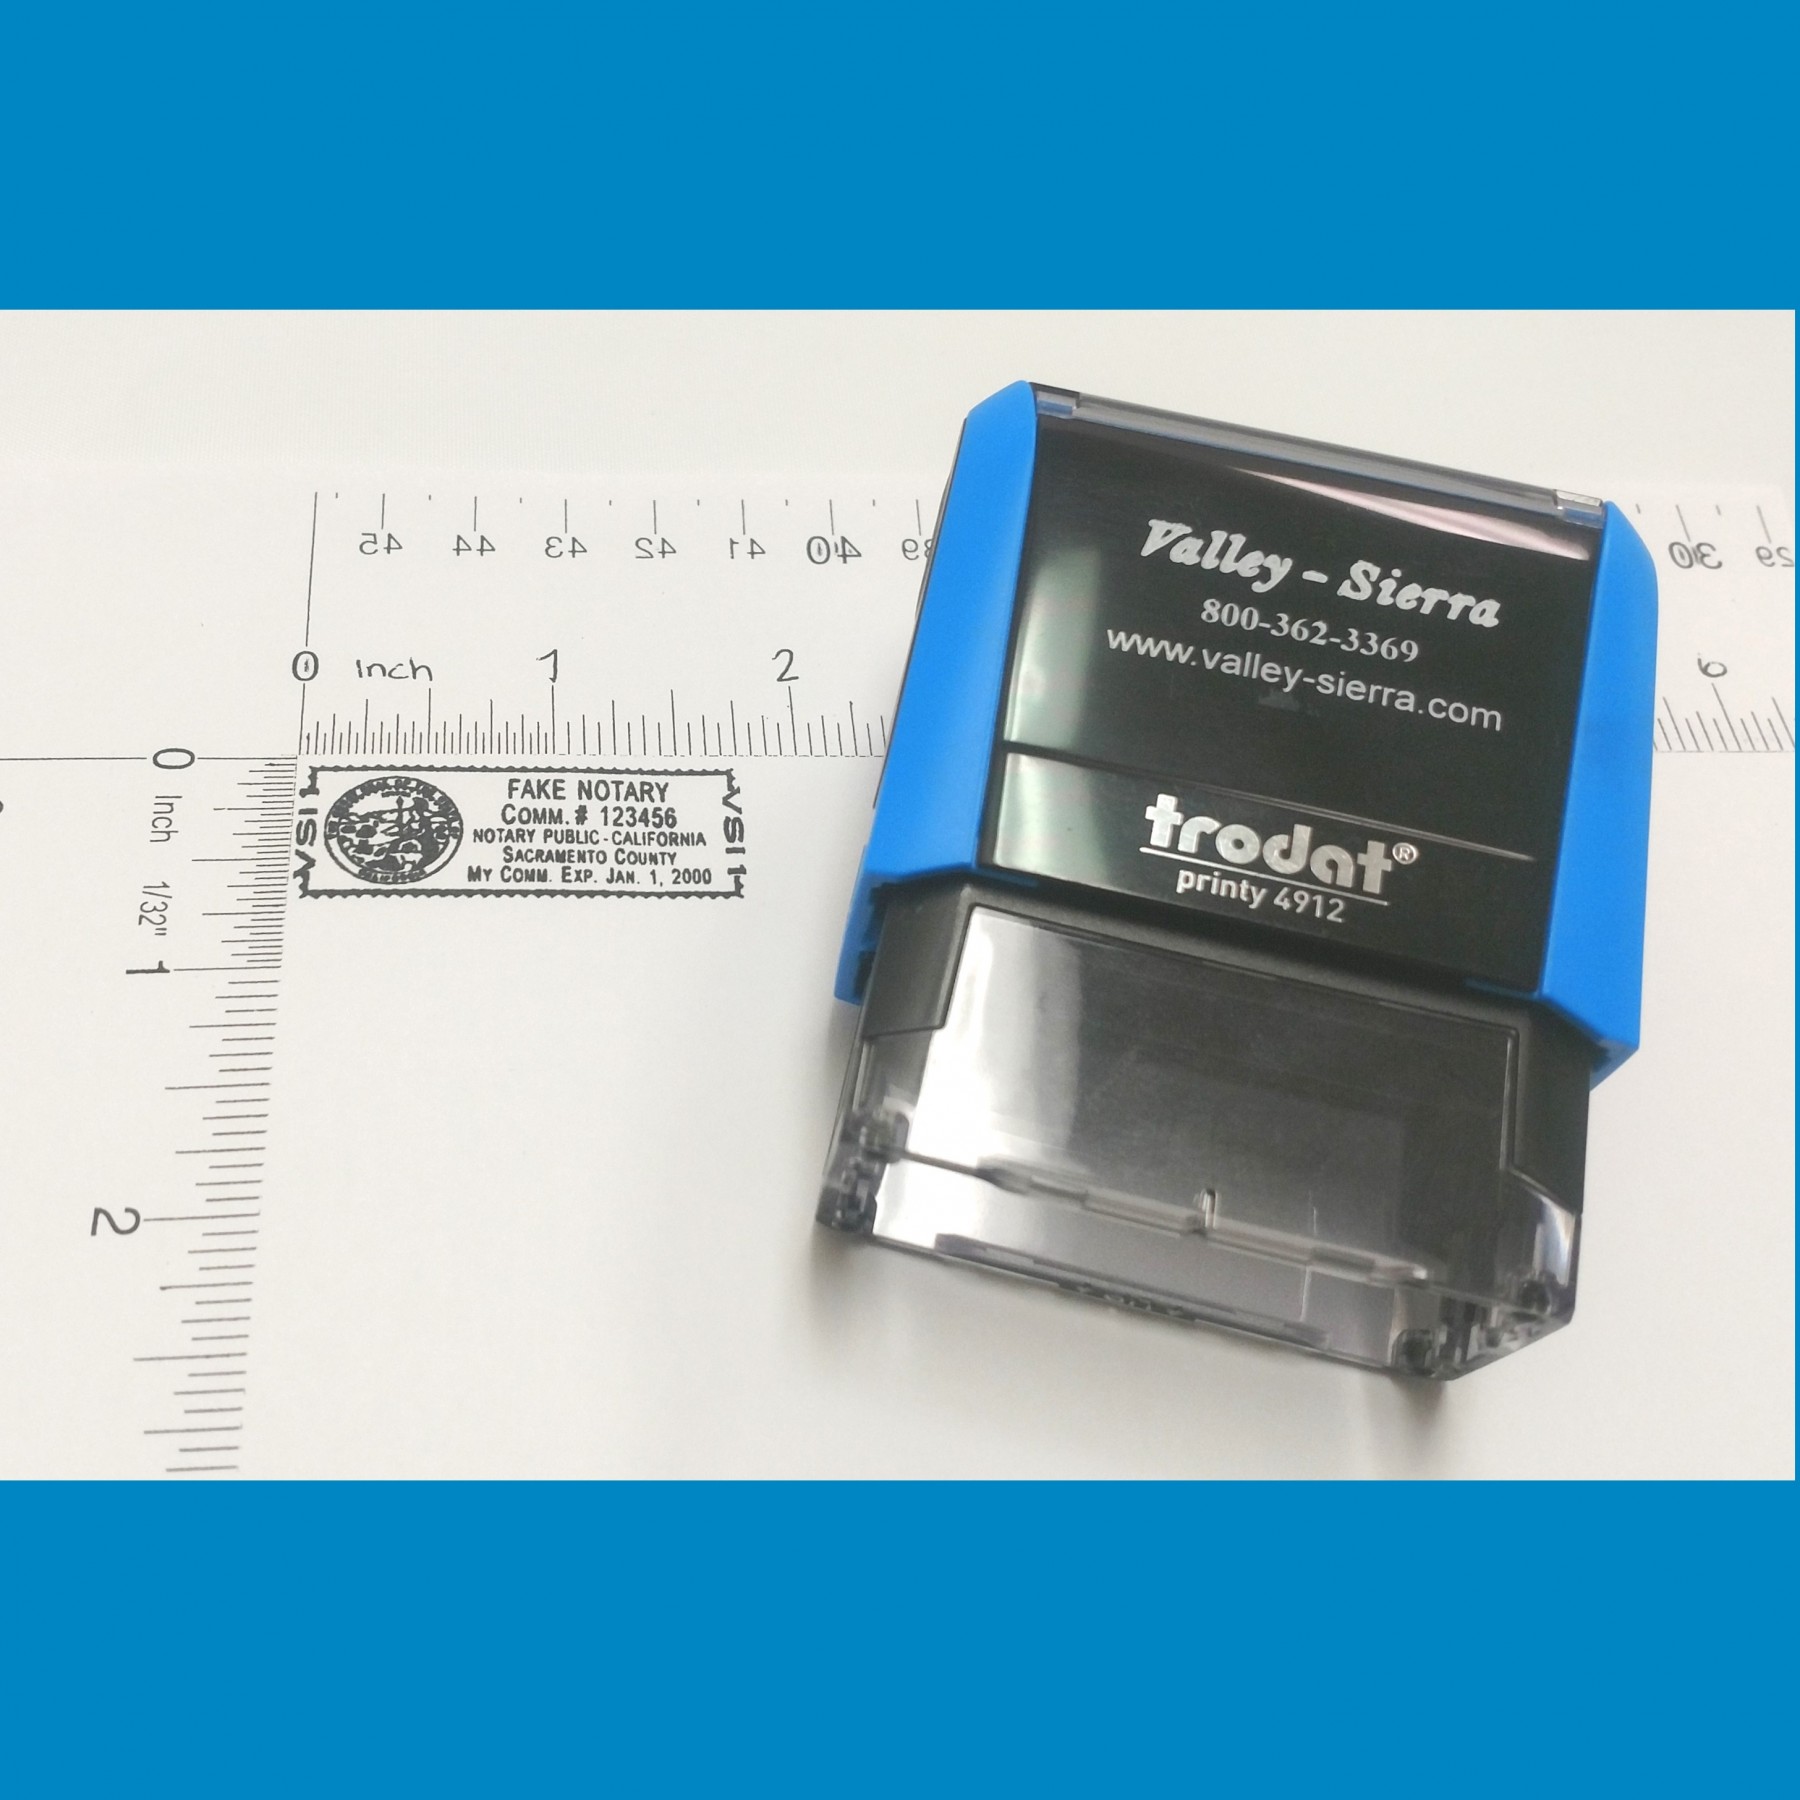 Deluxe Self-Ink Stamp - All Products